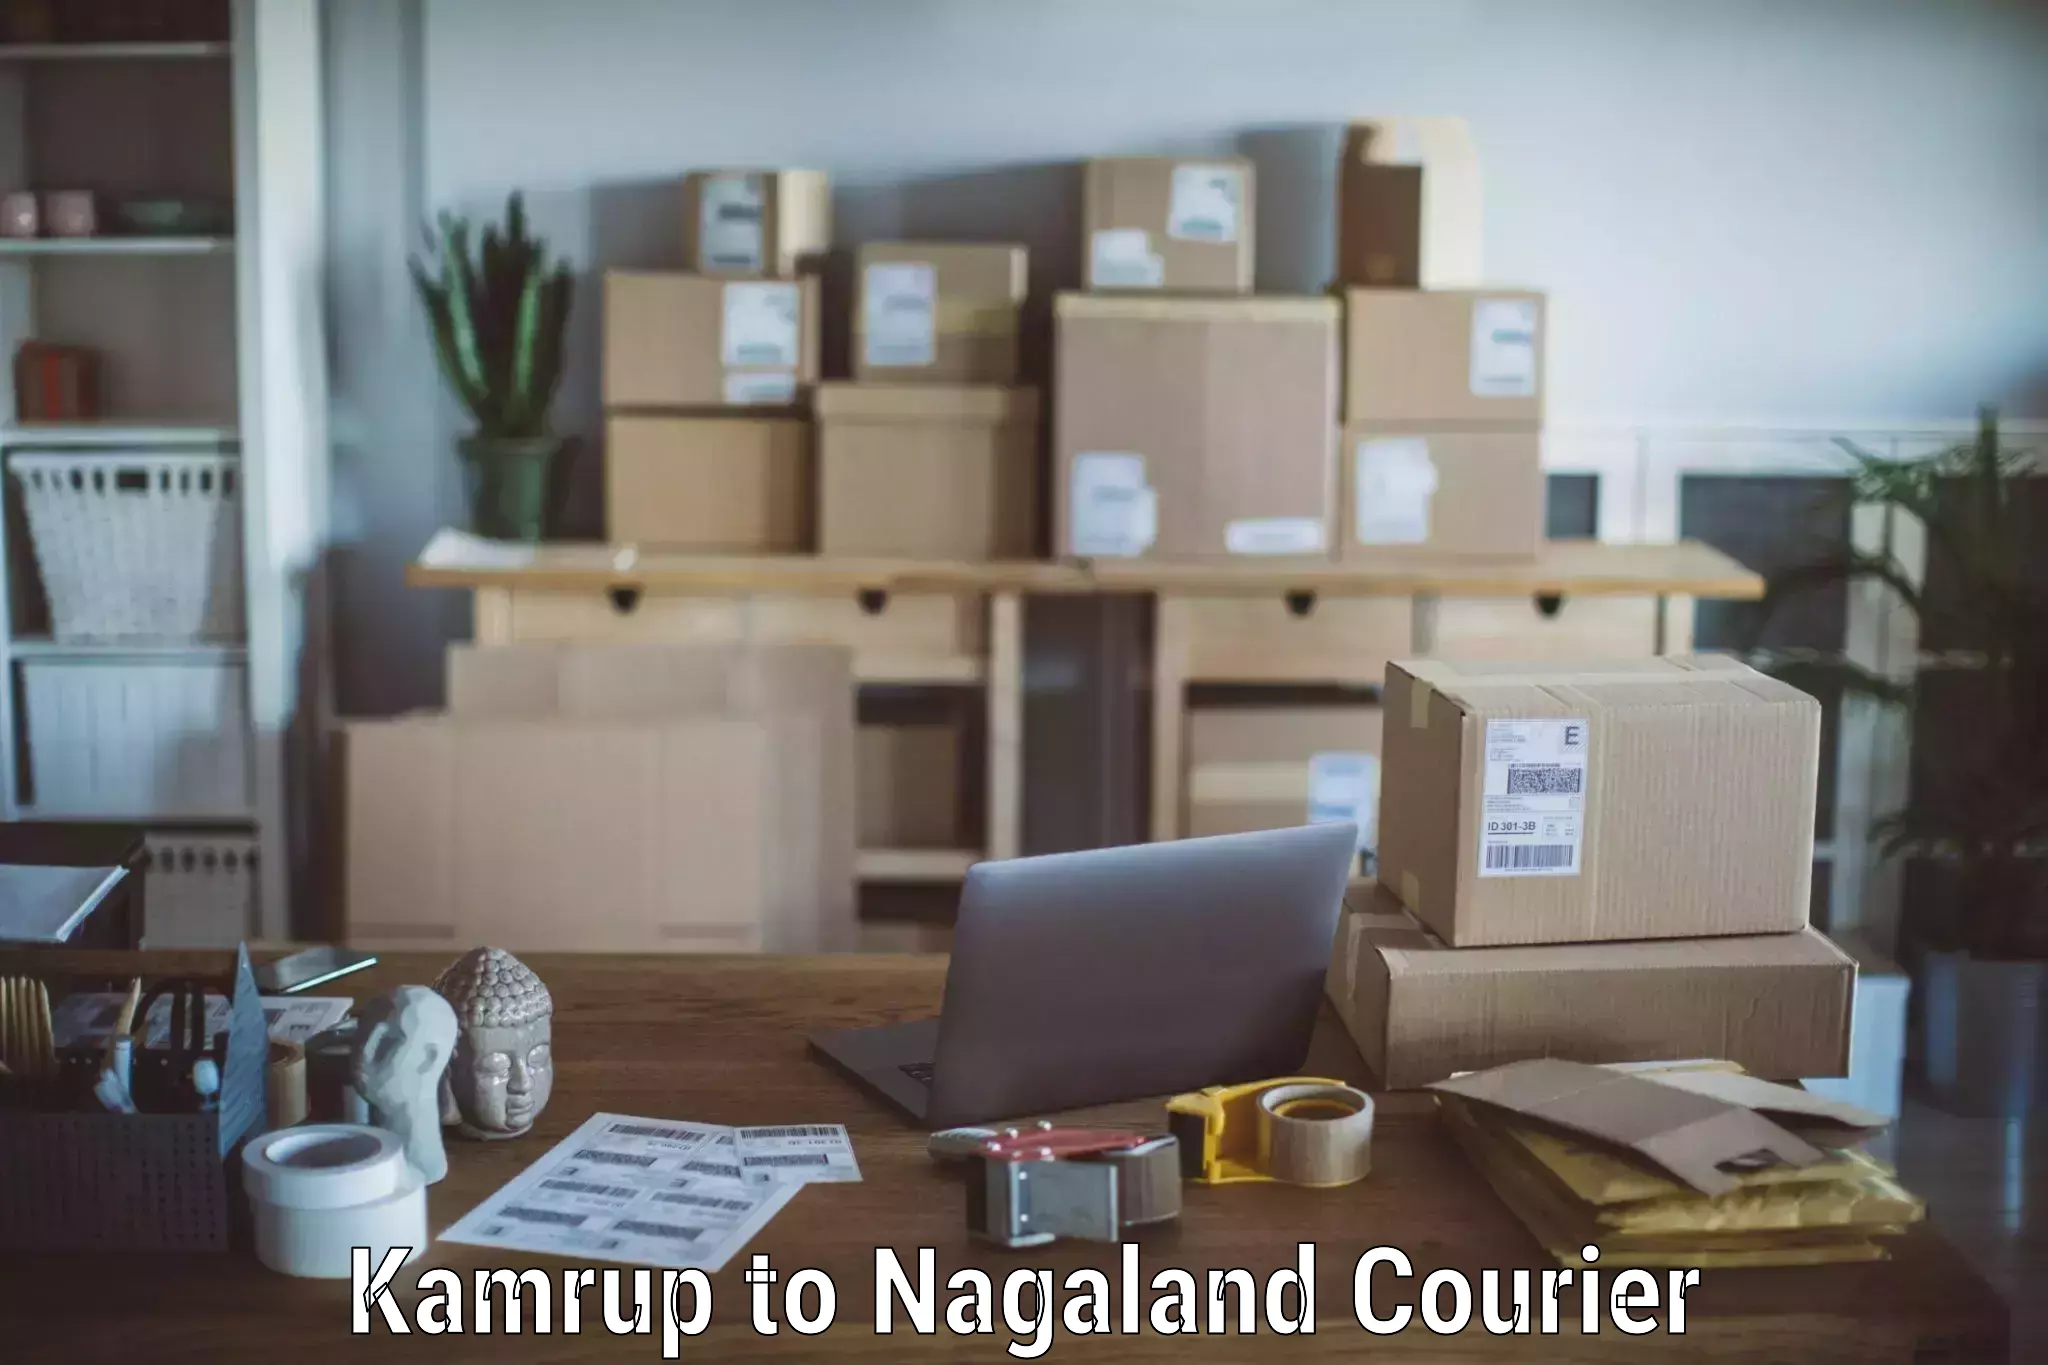 Trusted relocation experts Kamrup to Dimapur